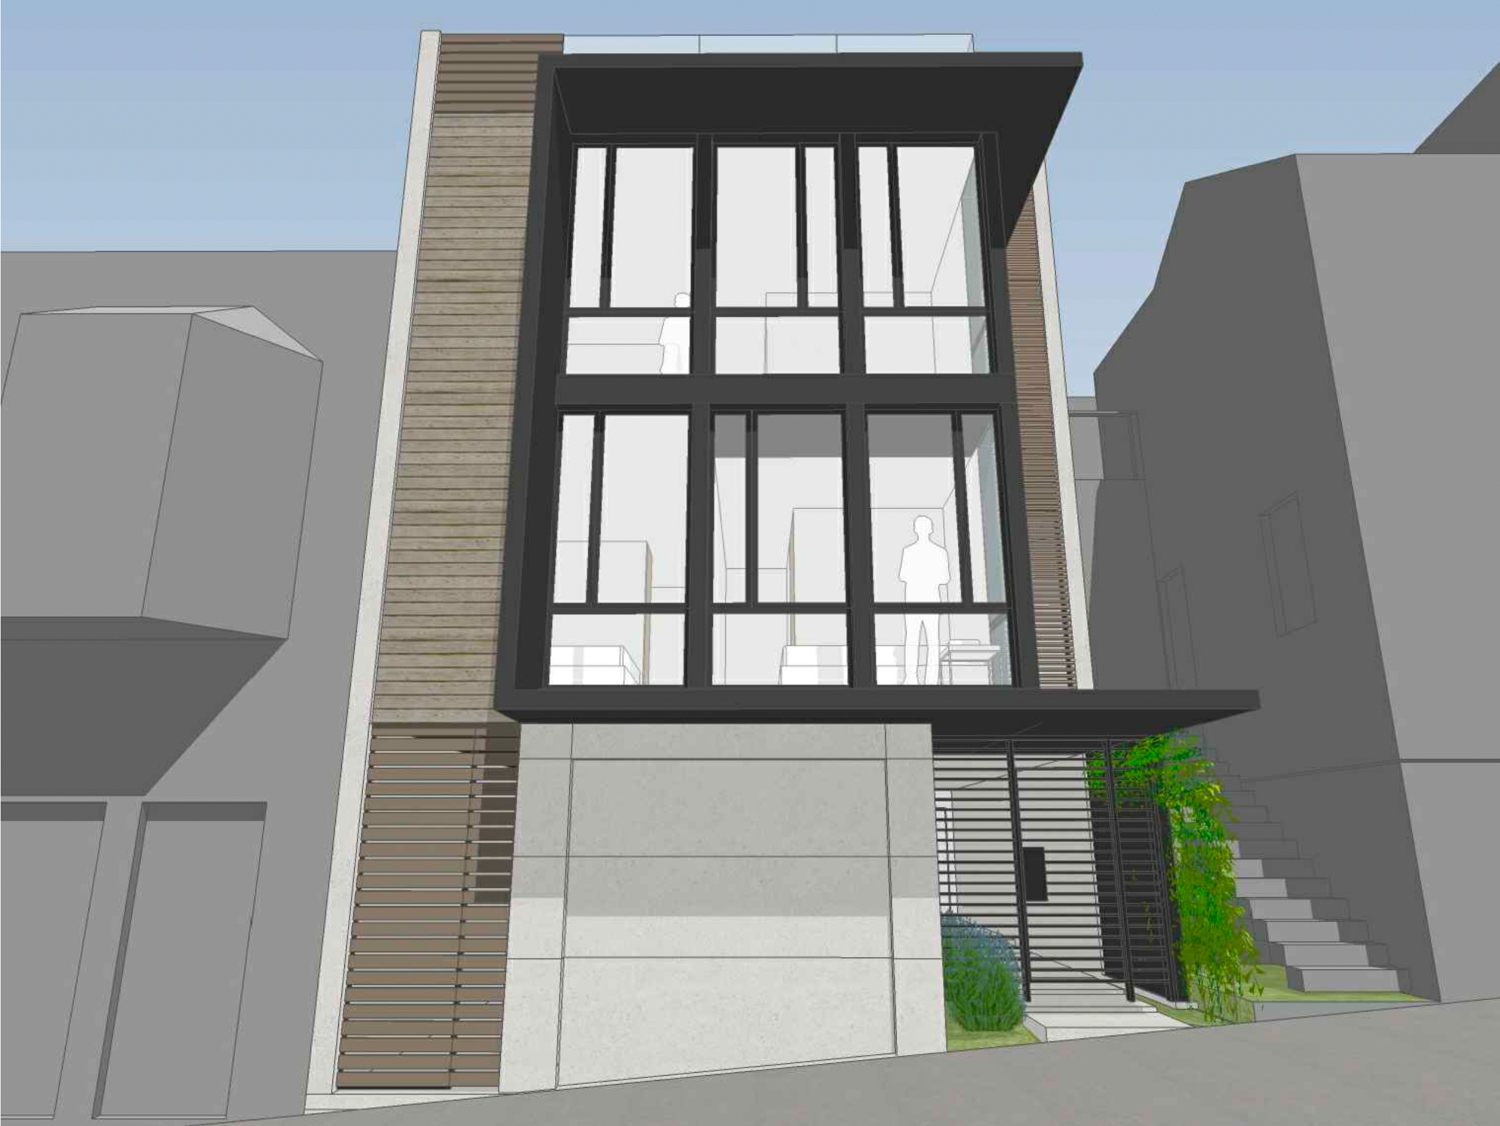 575 Vermont Street view from sidewalk, design by Timbre Architecture